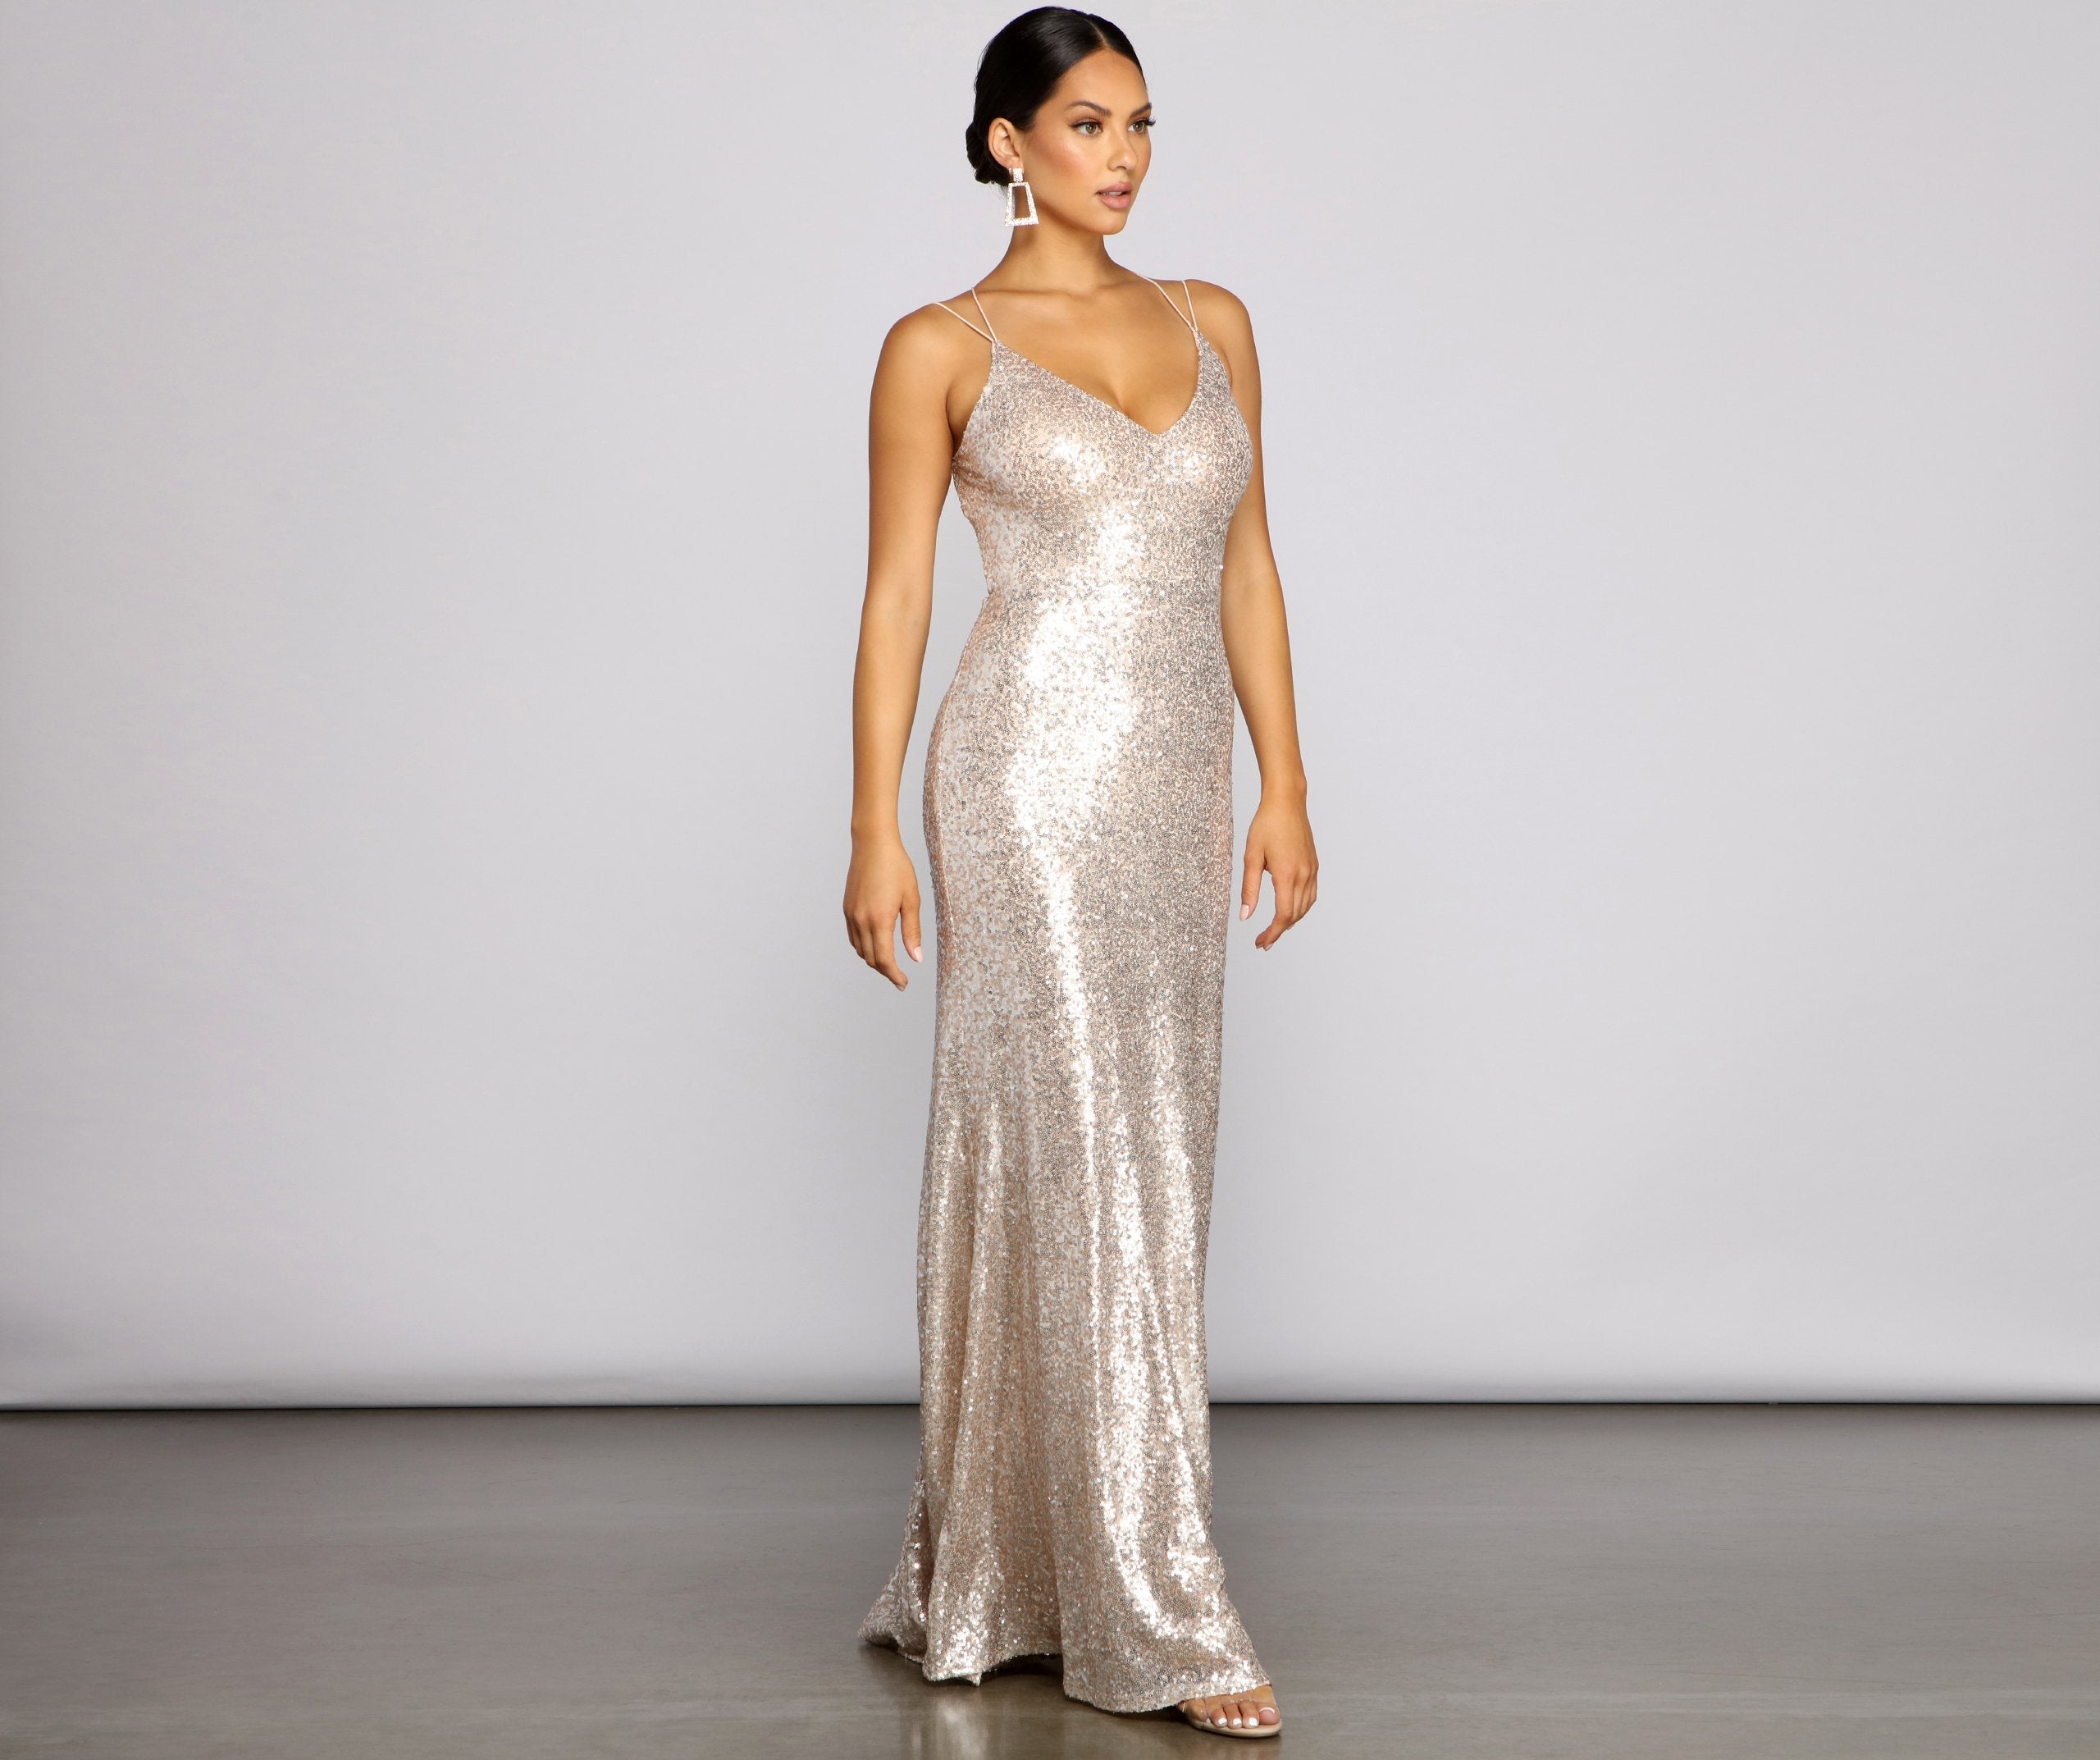 Elena Sequin Open-Back Formal Dress - Lady Occasions